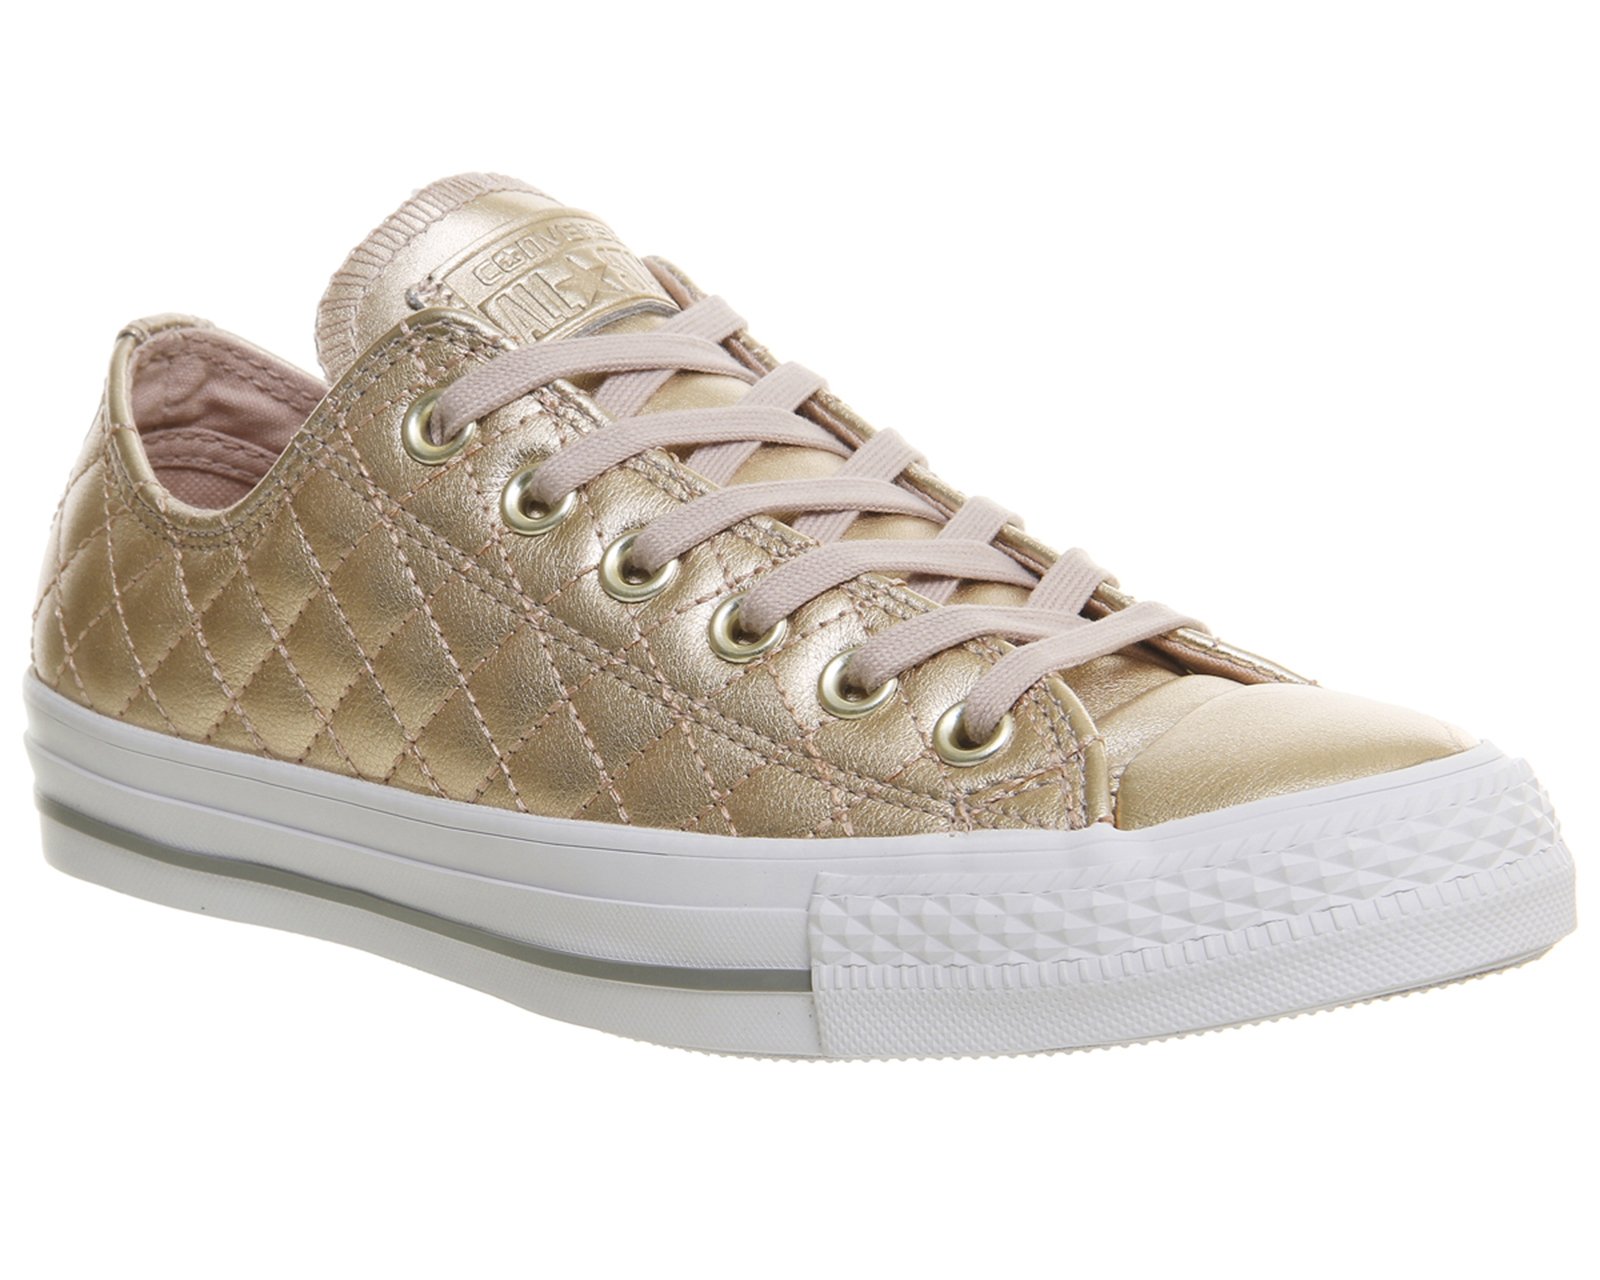 Converse All Star Low Leather Trainers Rose Gold Quilted - Hers trainers